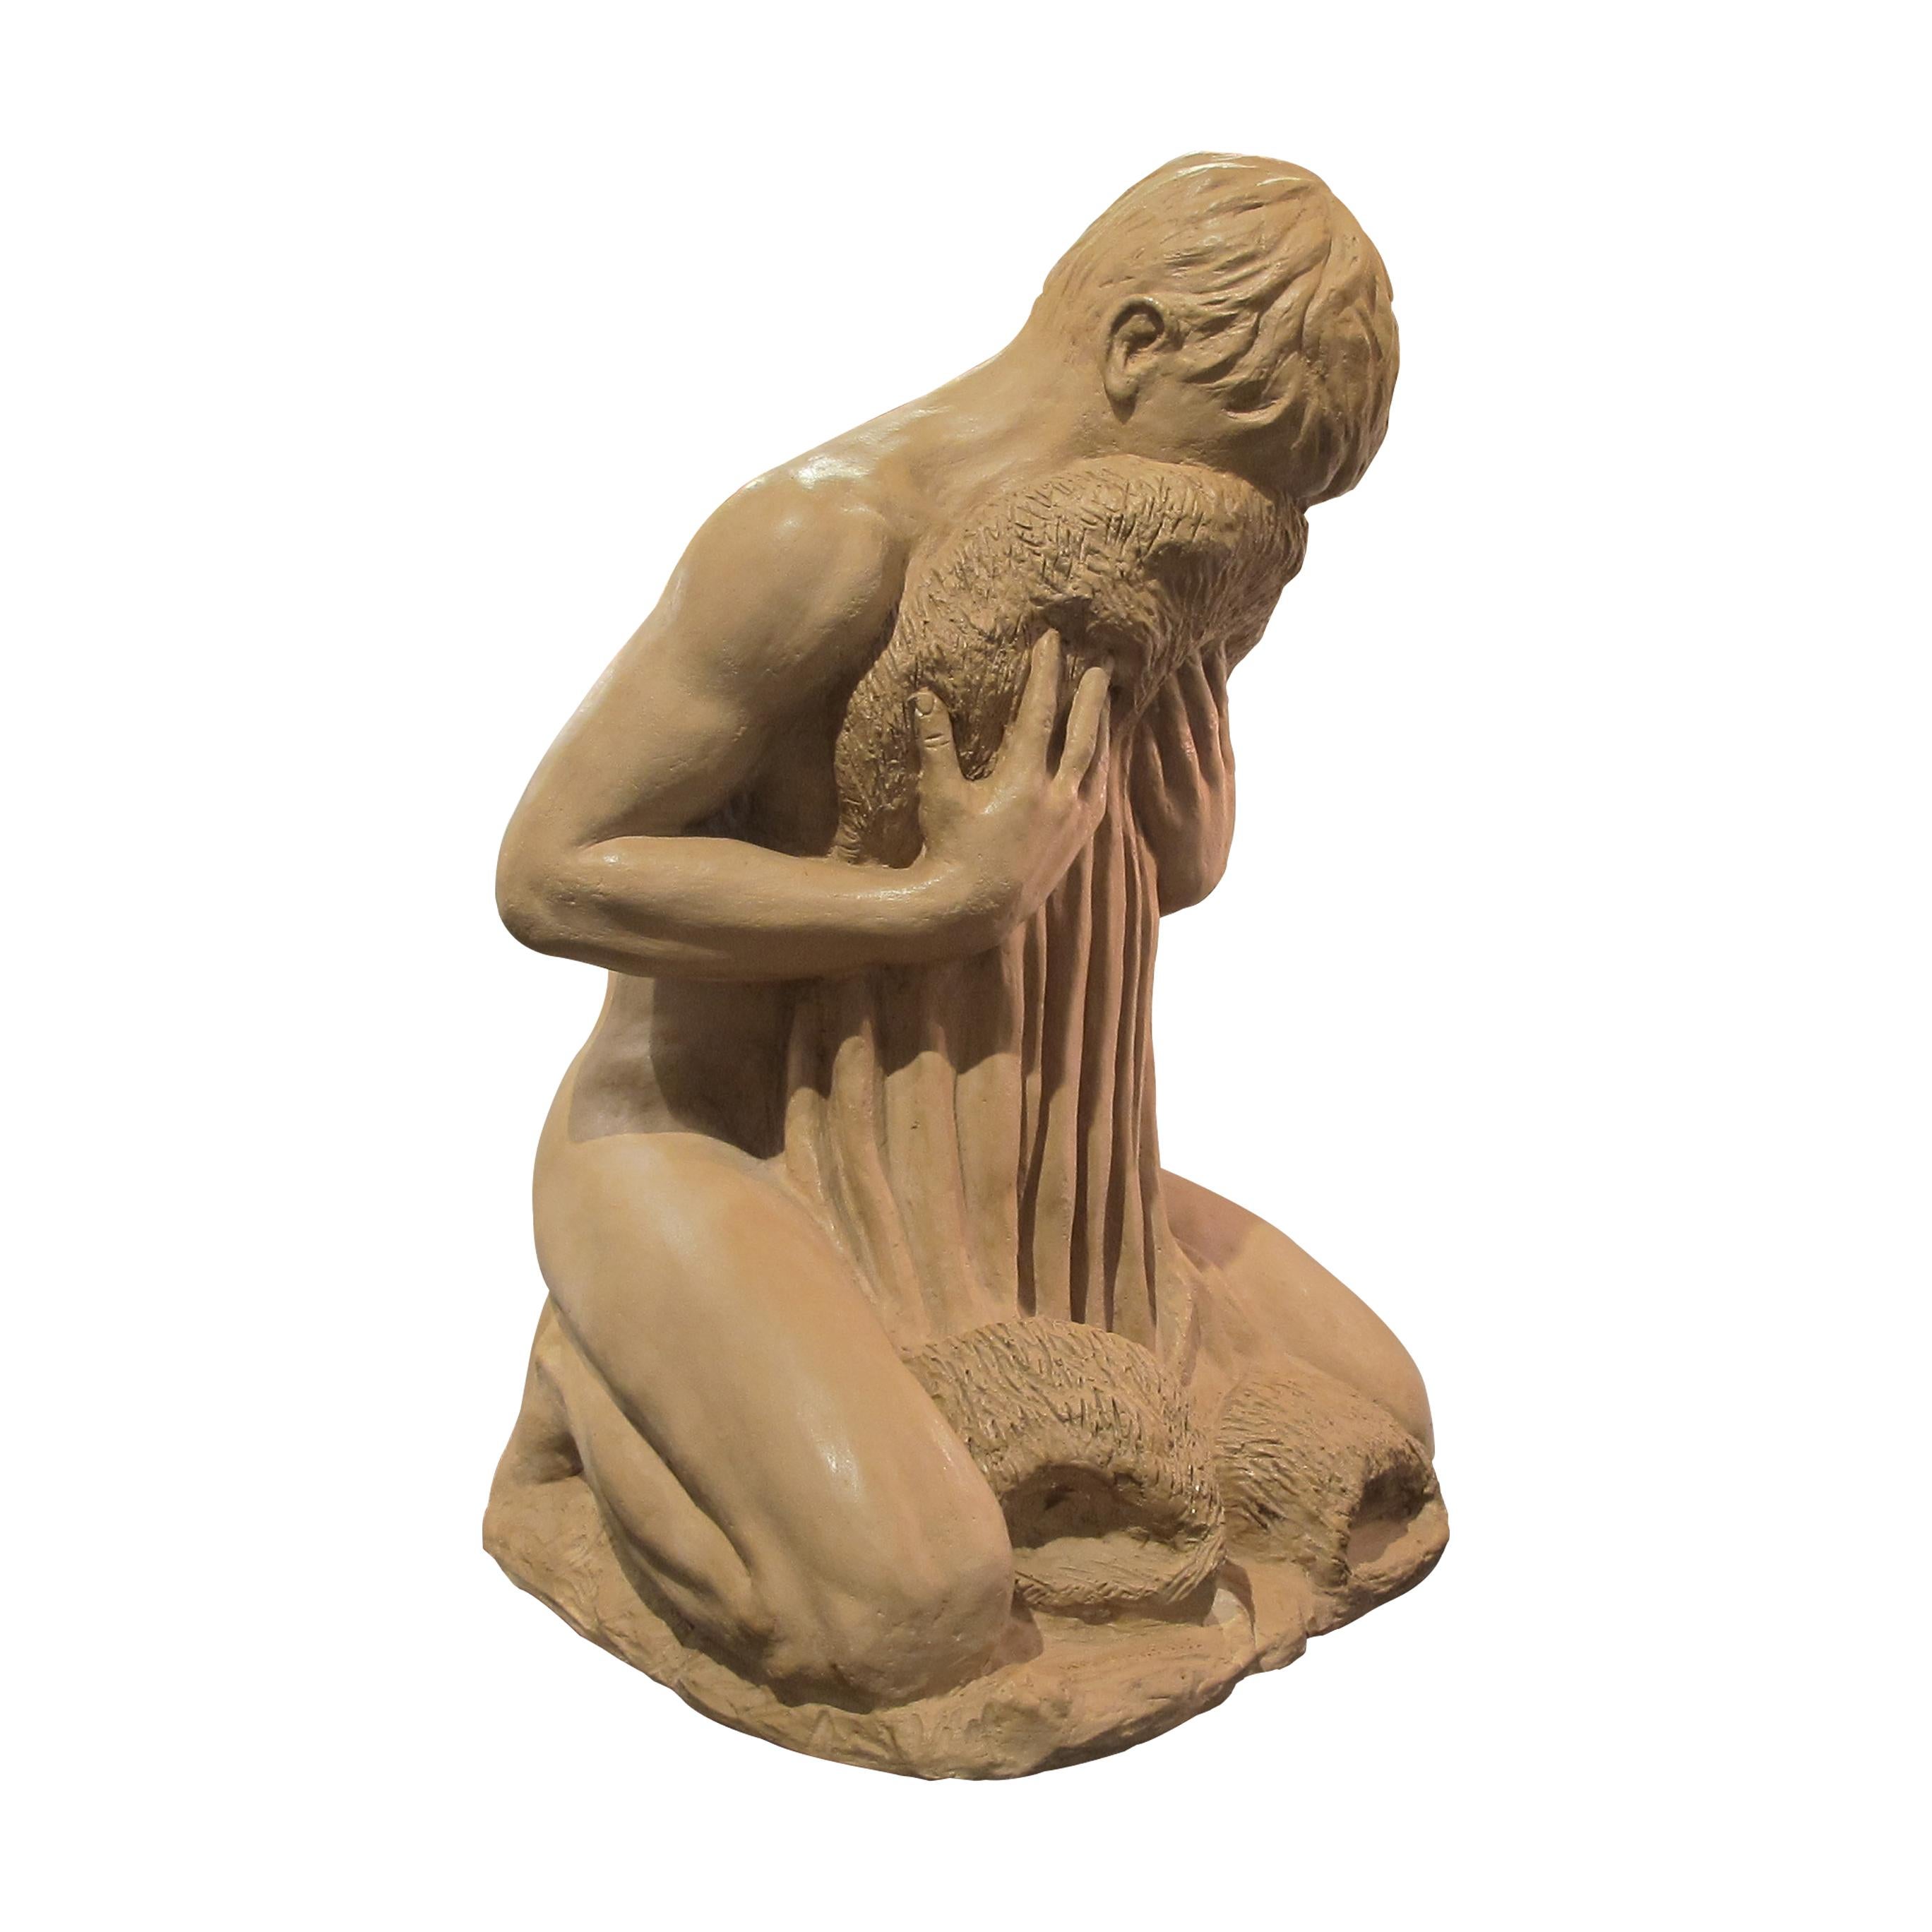 1950s French Terracotta Sculpture Of A Man Kneeling